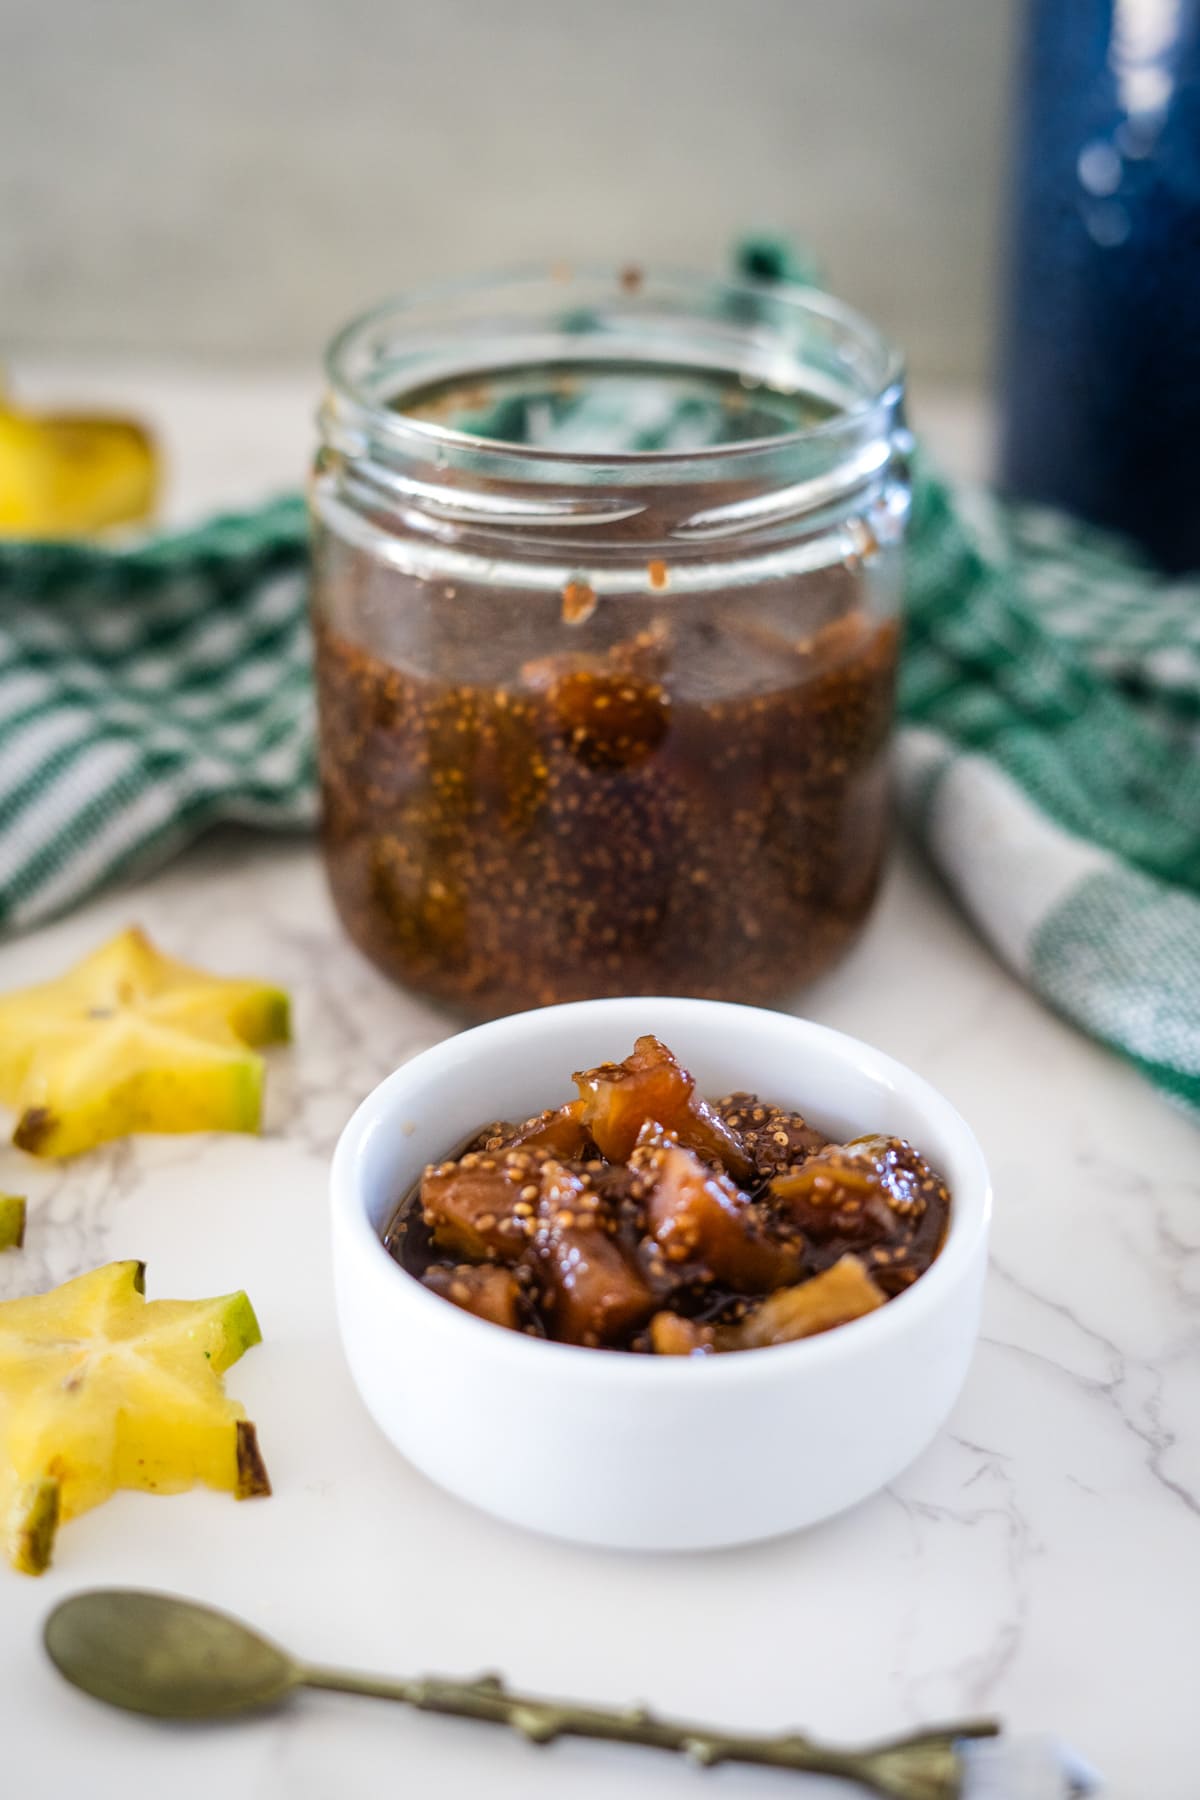 A jar of star fruit jam with a spoon next to it.